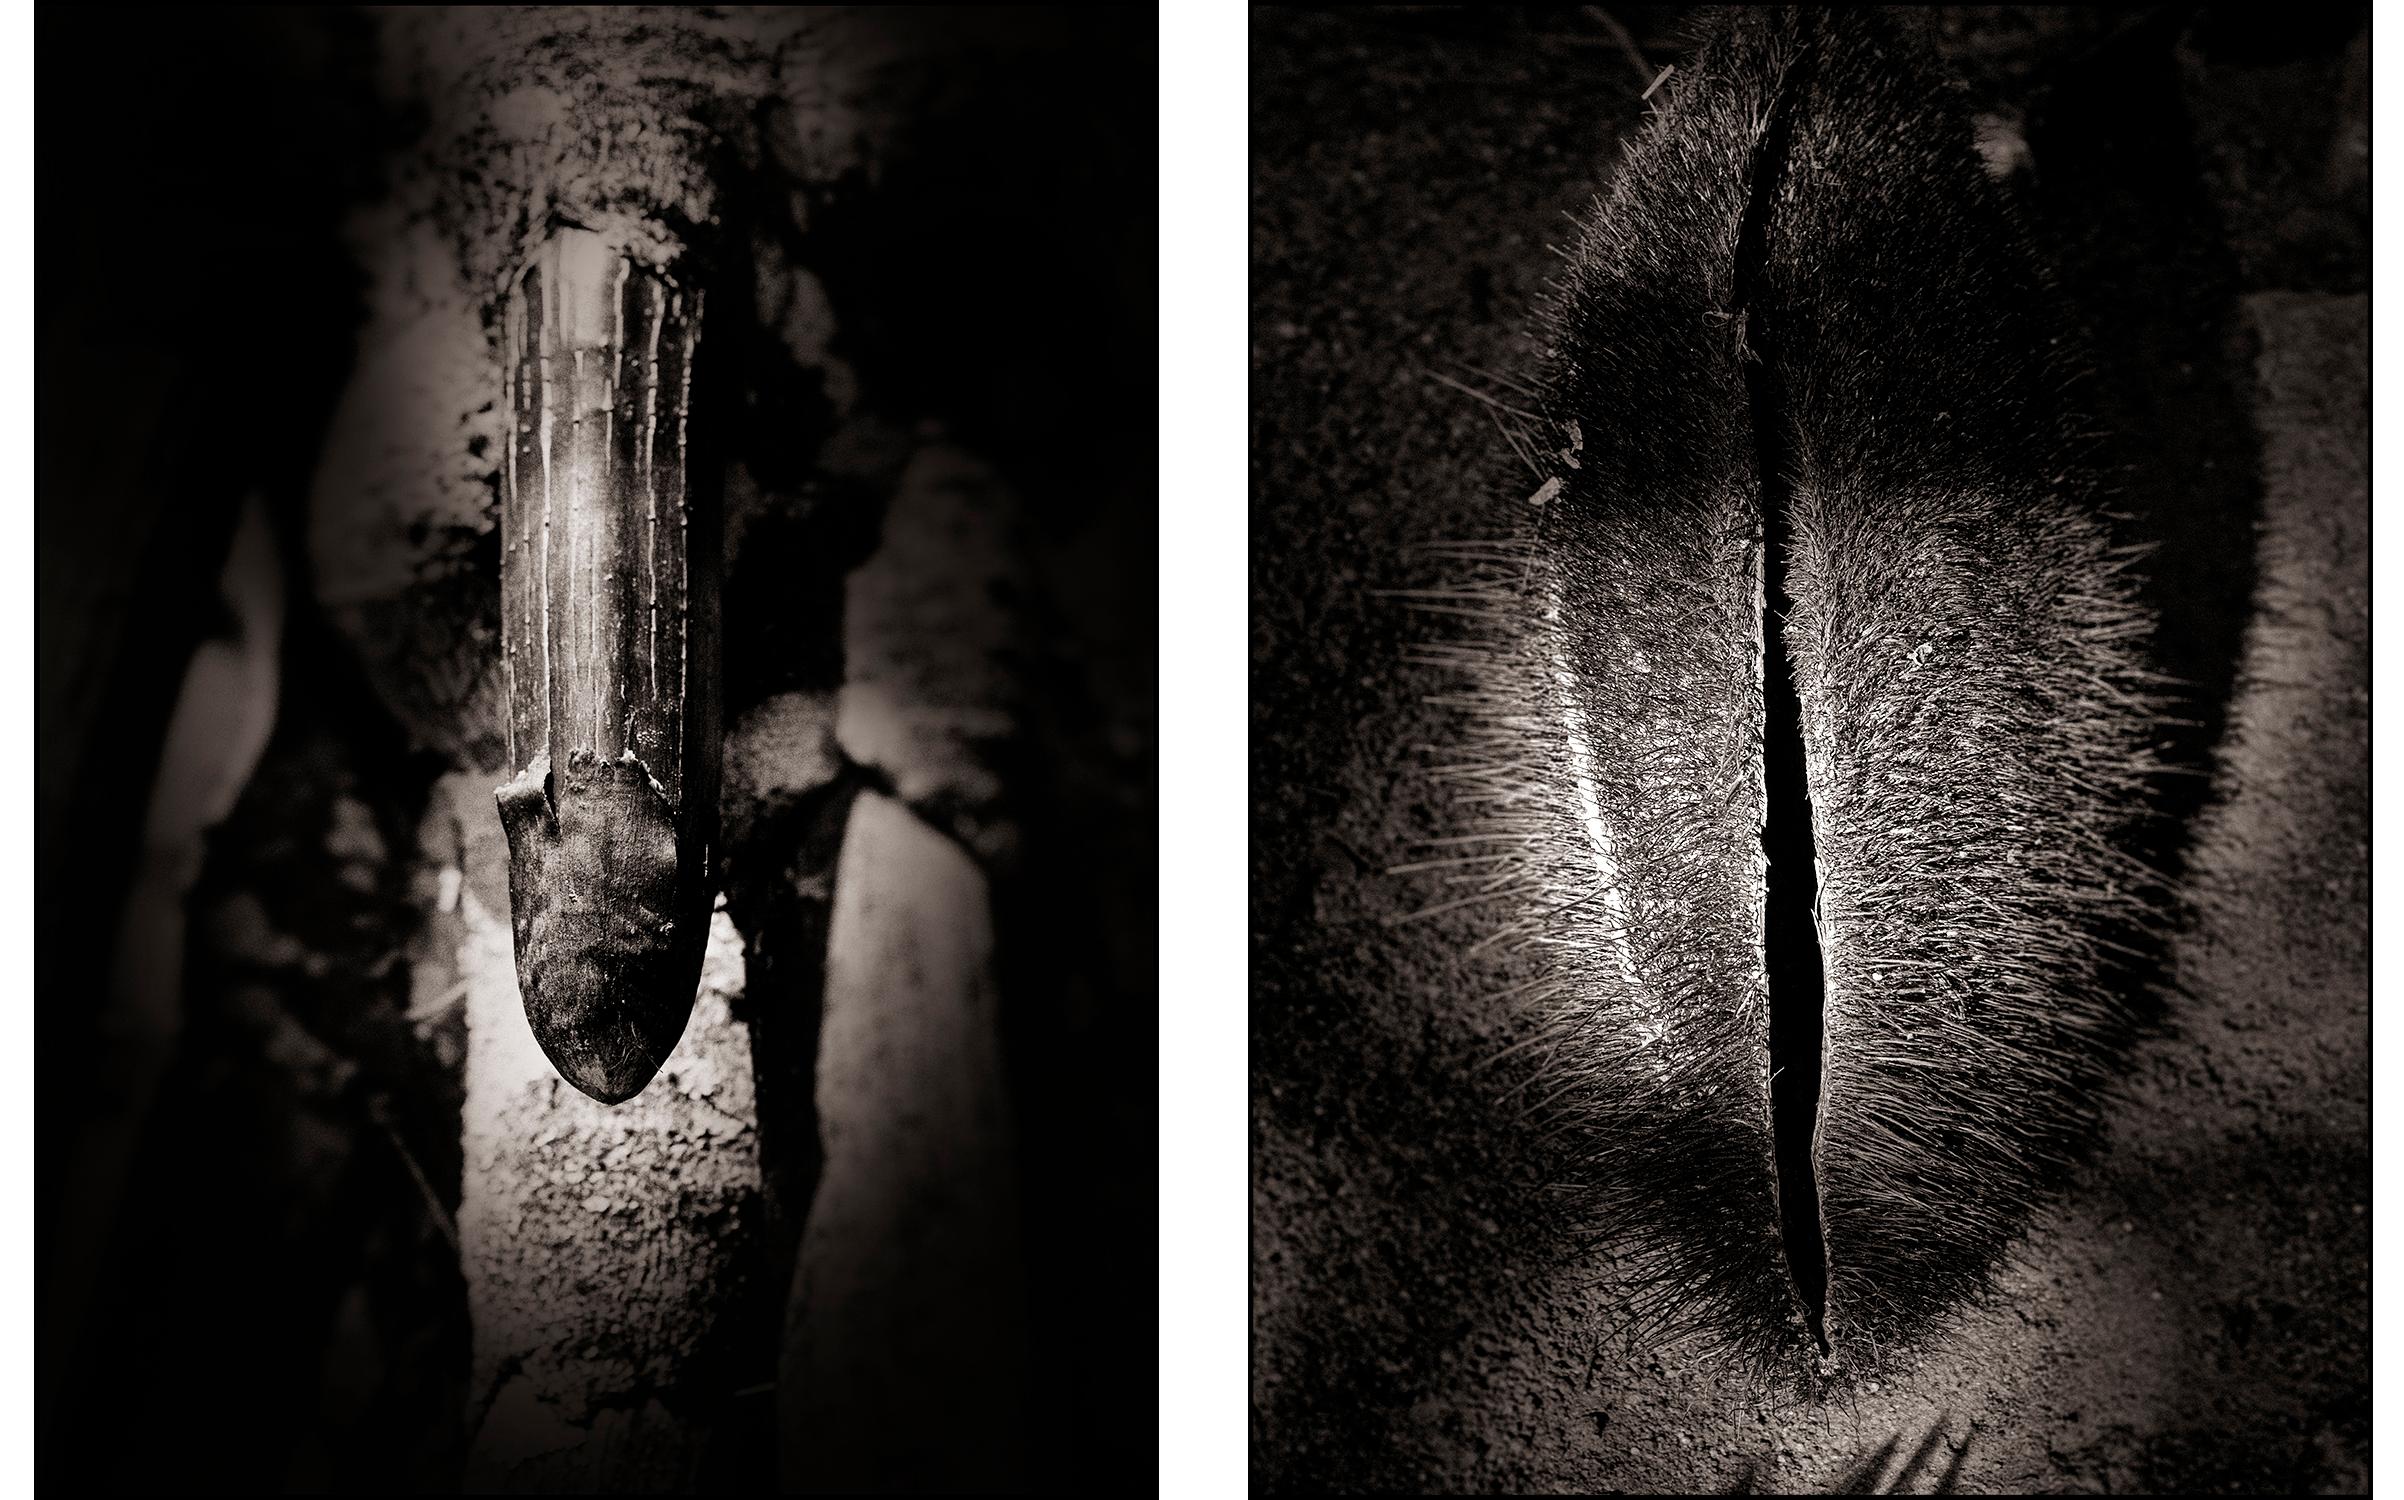 This Diptych consists of 2 images, each  37,5 x 50 cm.
Edition of 25
signed and numbered by the artist

The Seychelles palm, also known as the Seychelles nut, is an endemic palm species that occurs exclusively in the Seychelles. Its seeds are the